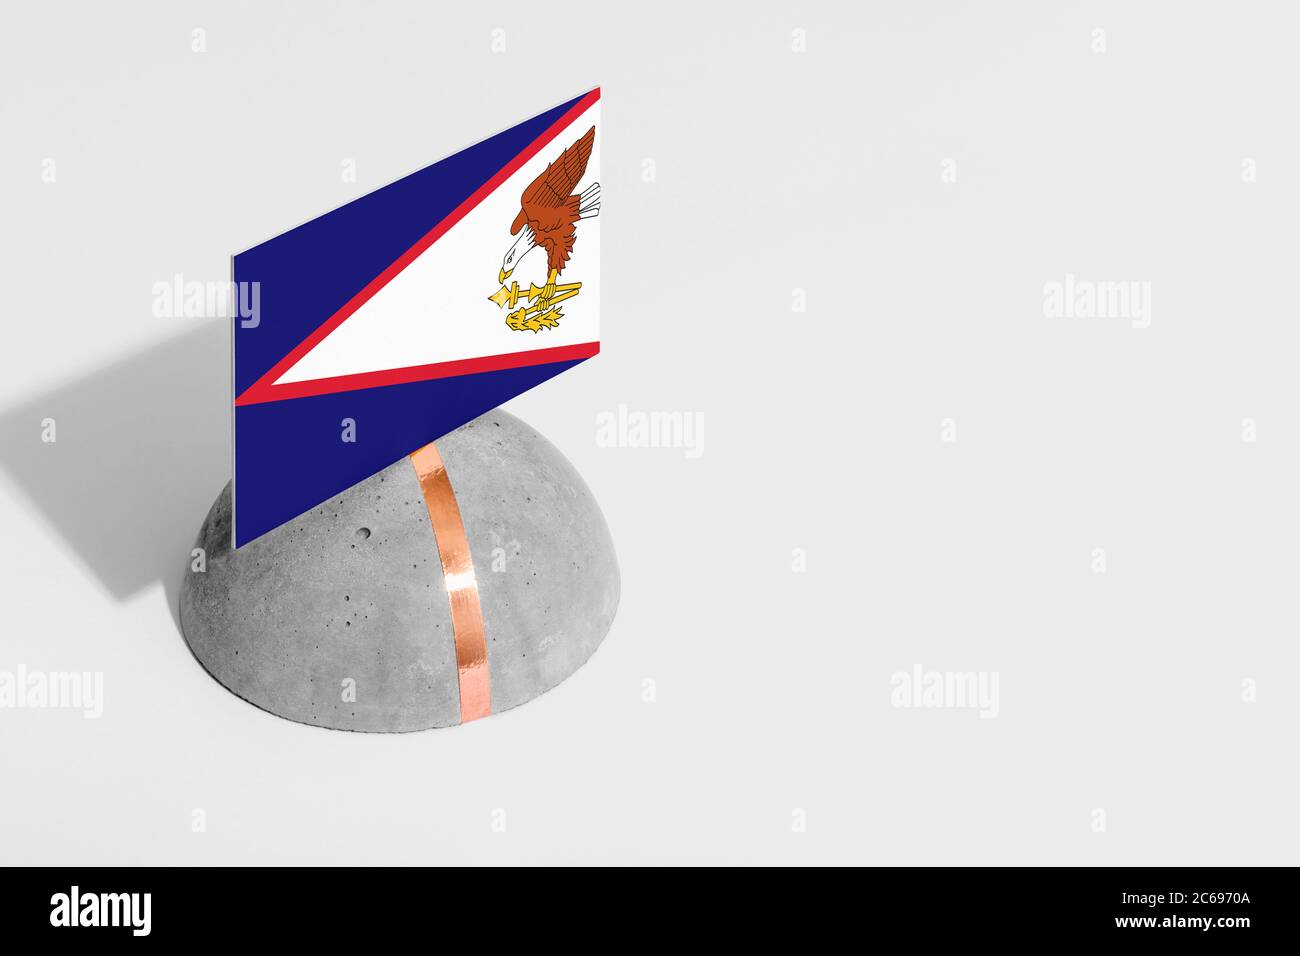 American Samoa flag tagged on rounded stone. White isolated background. Side view minimal national concept. Stock Photo